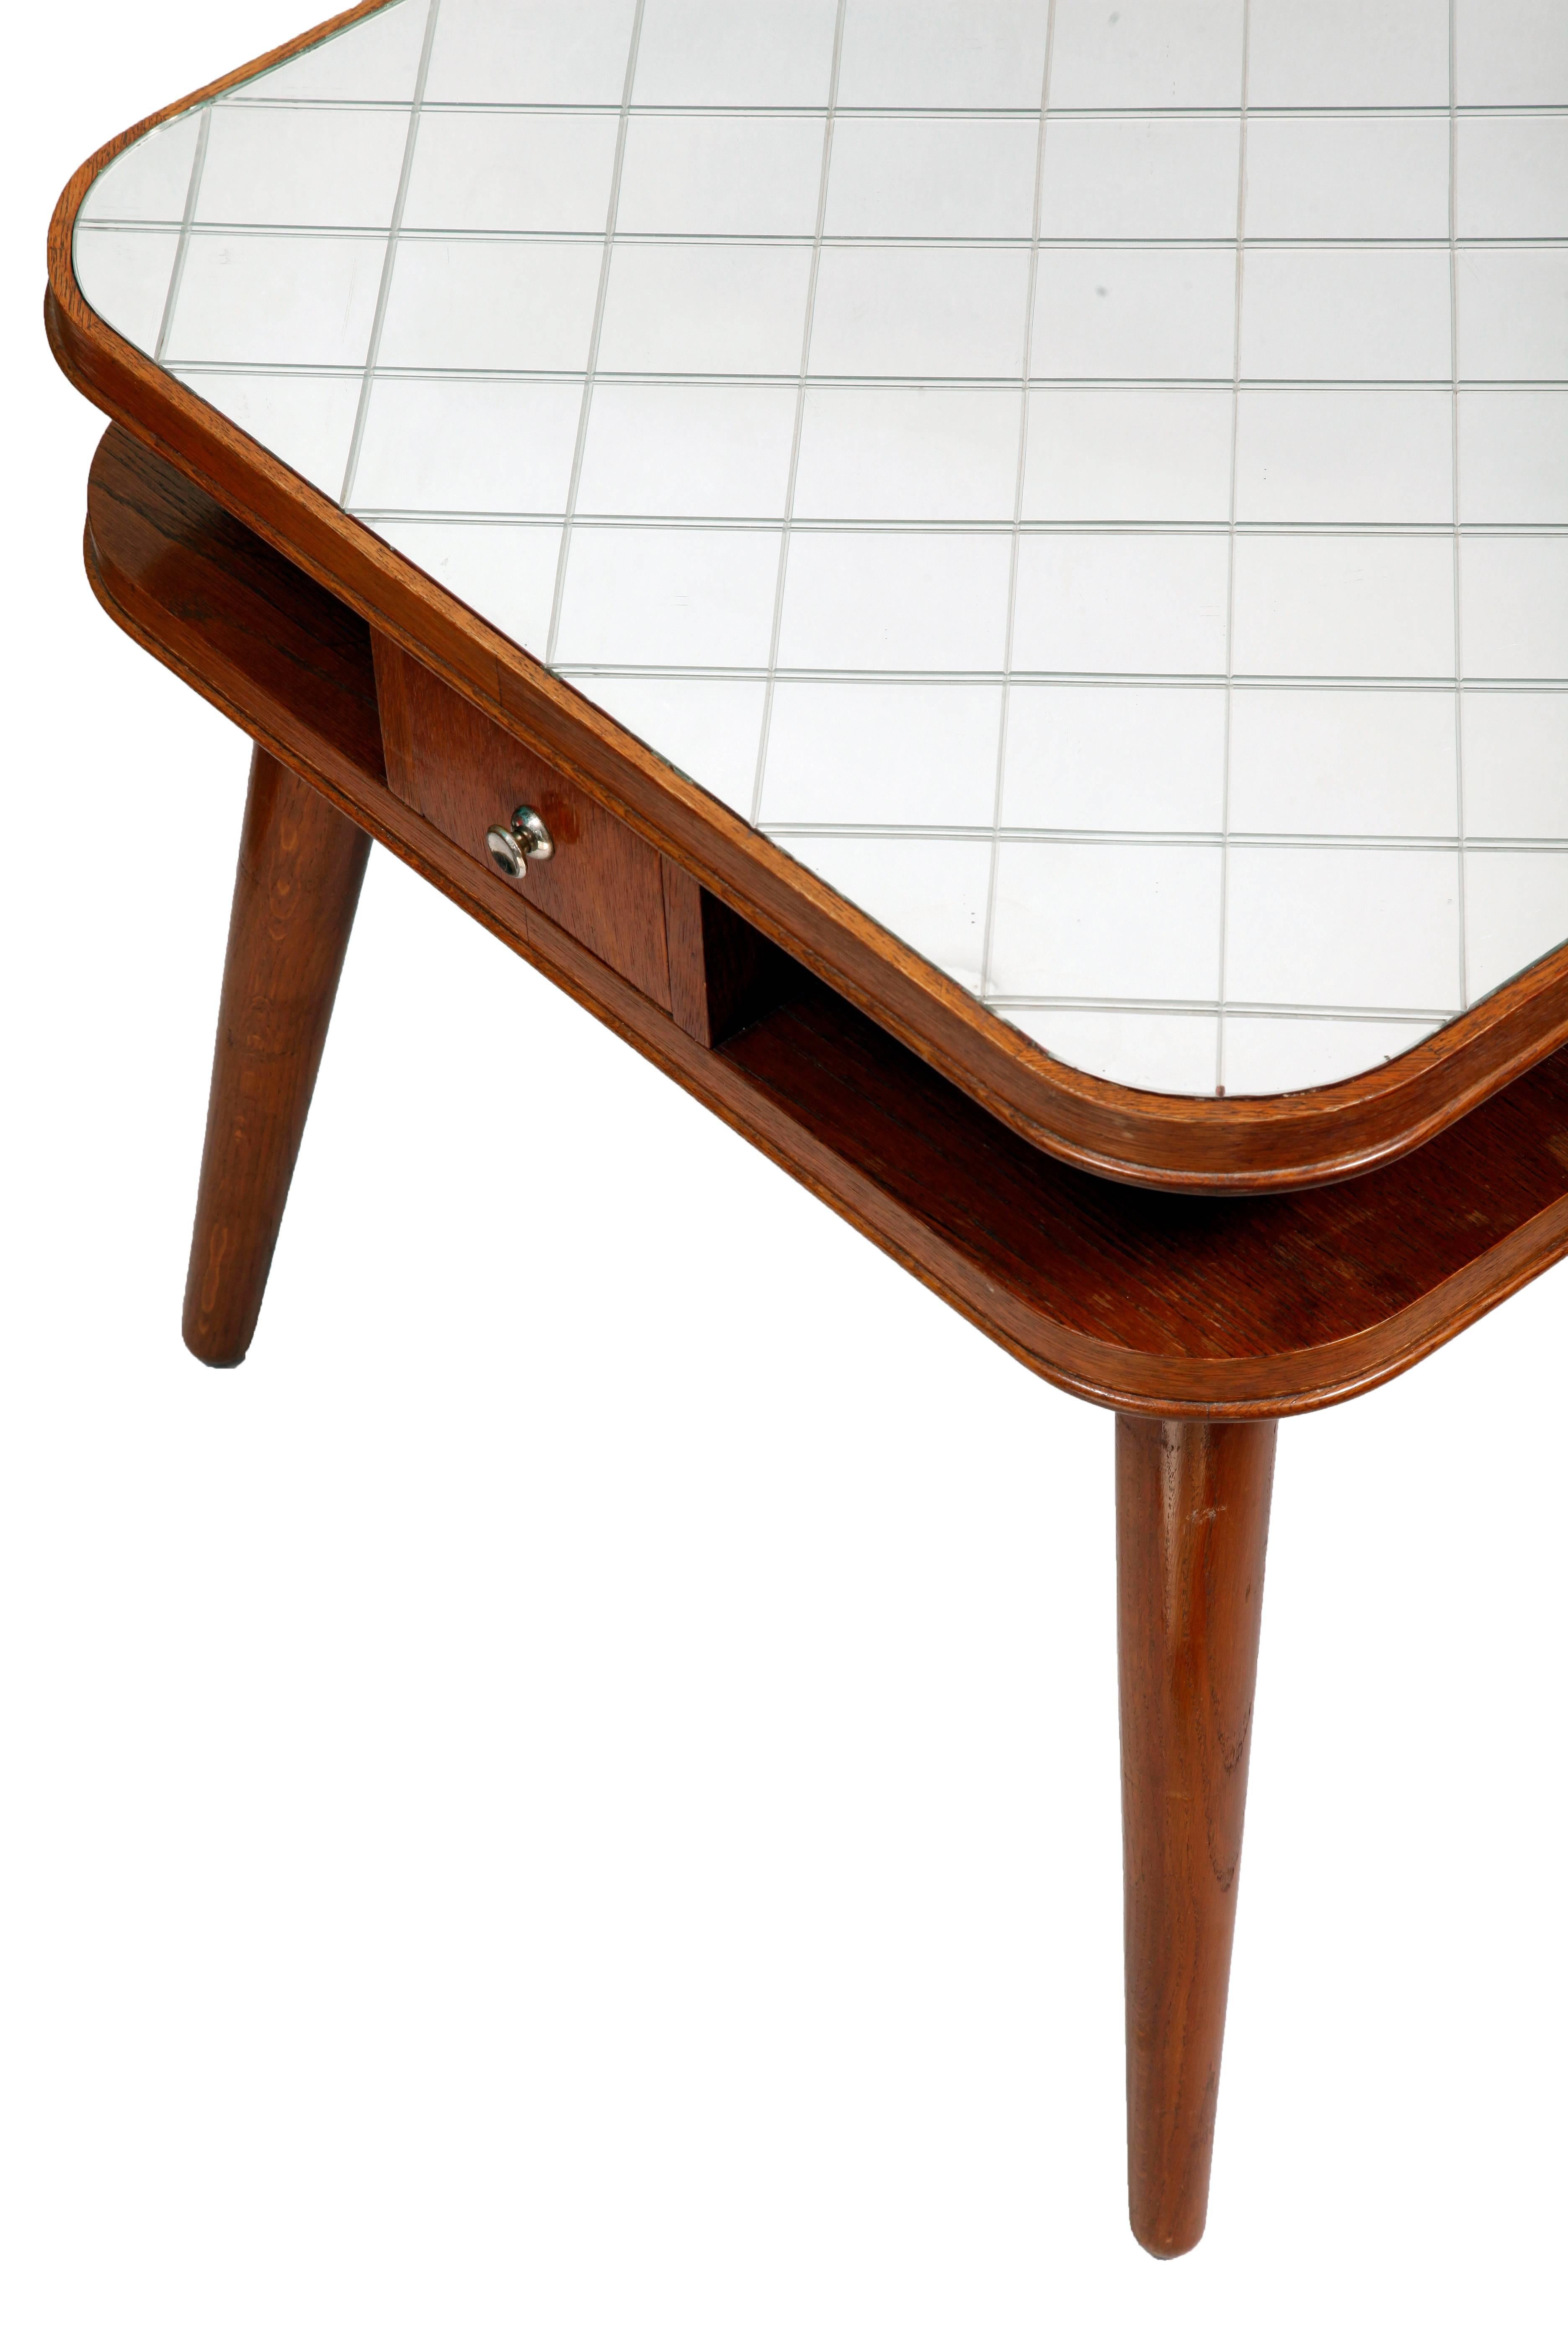  Card Table with a Mirror Top, Oak, Czech Art Deco, 1950s For Sale 3